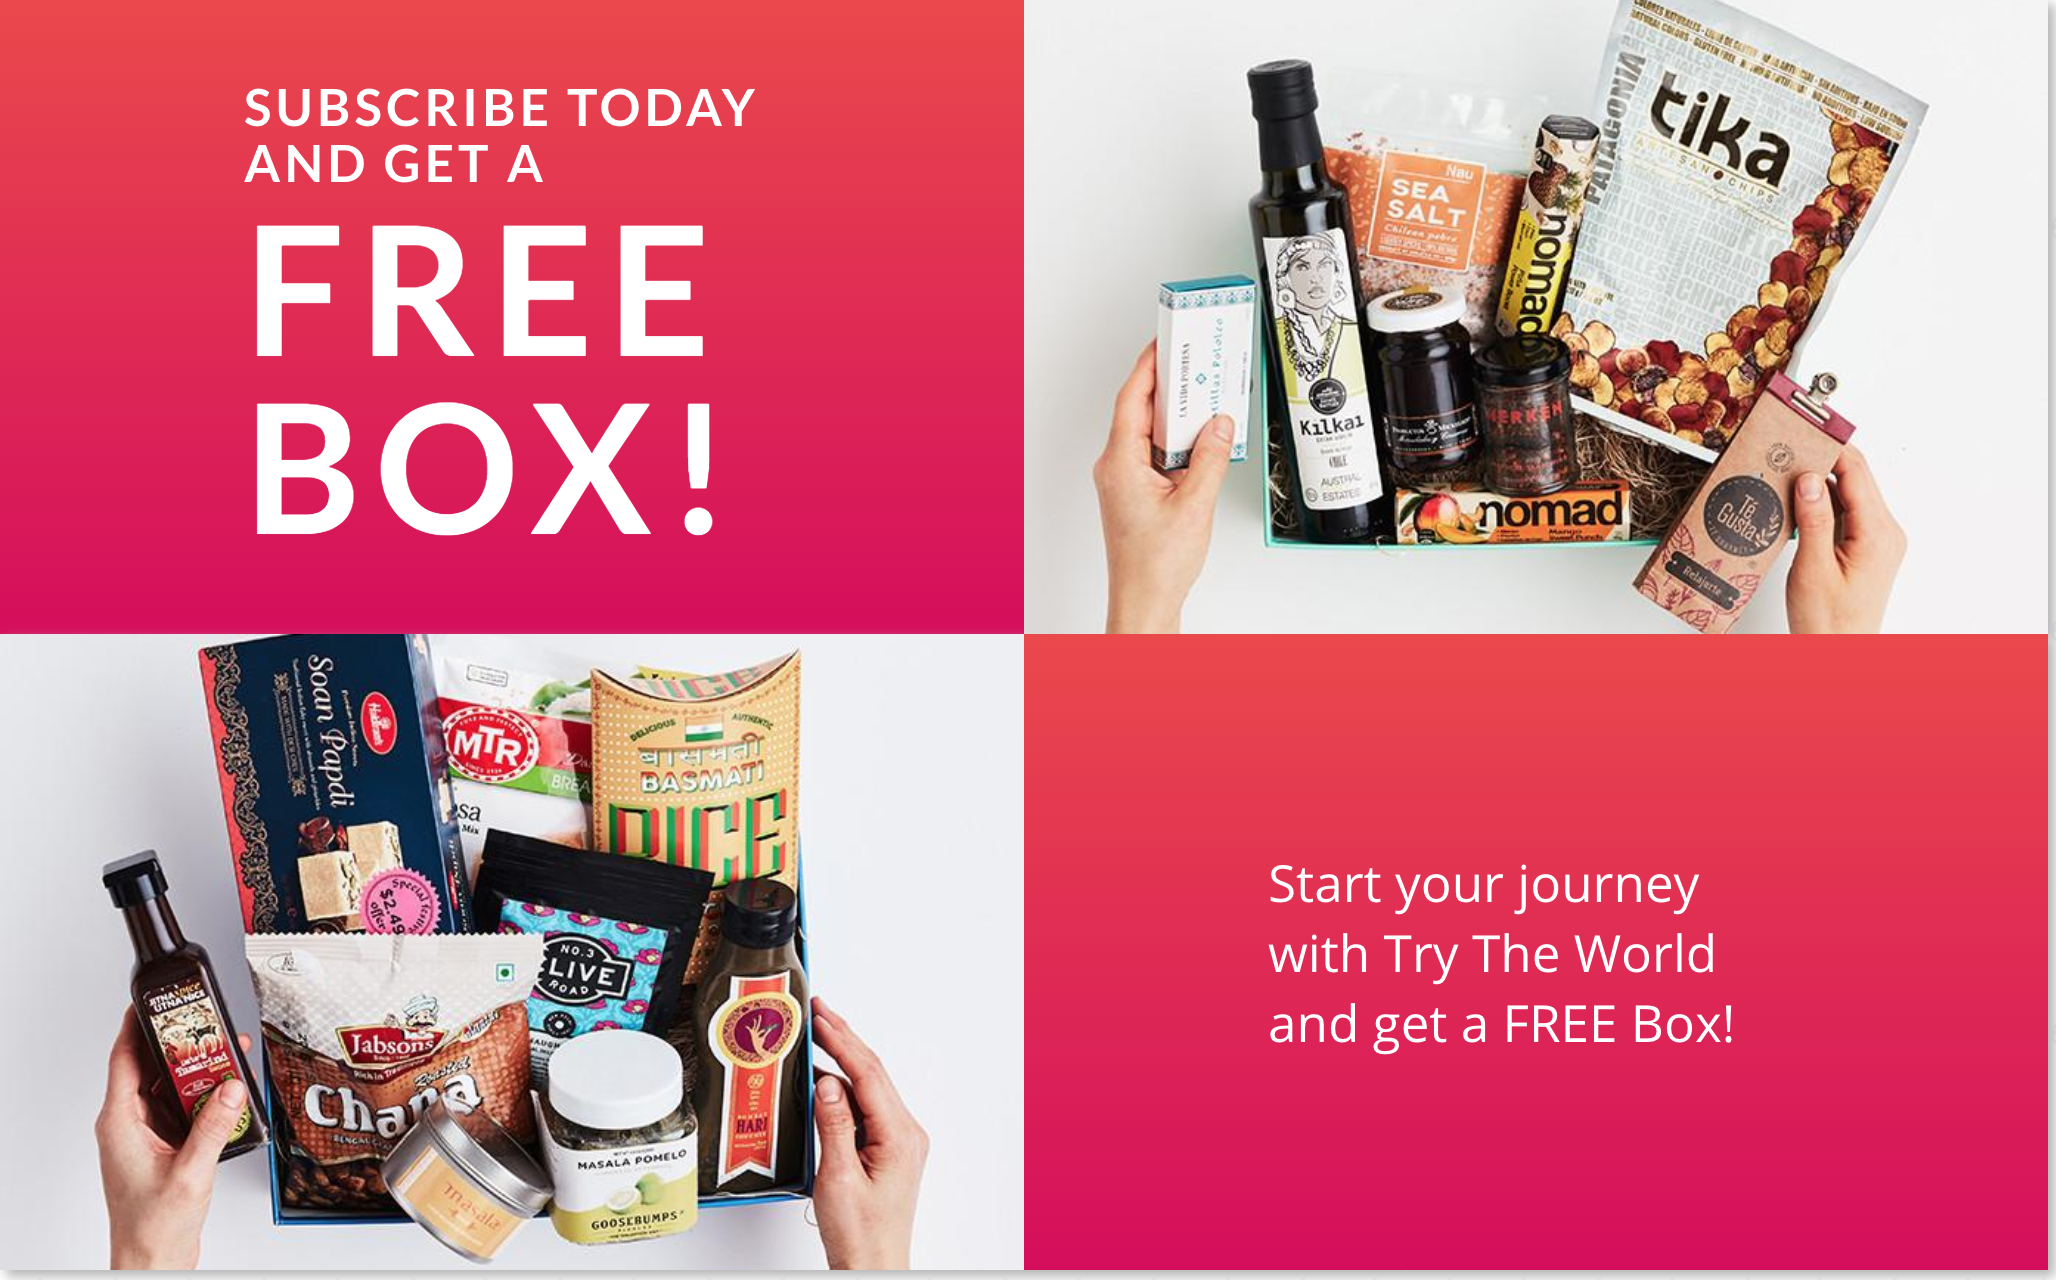 Try The World Deal – Buy One Box, Get One FREE